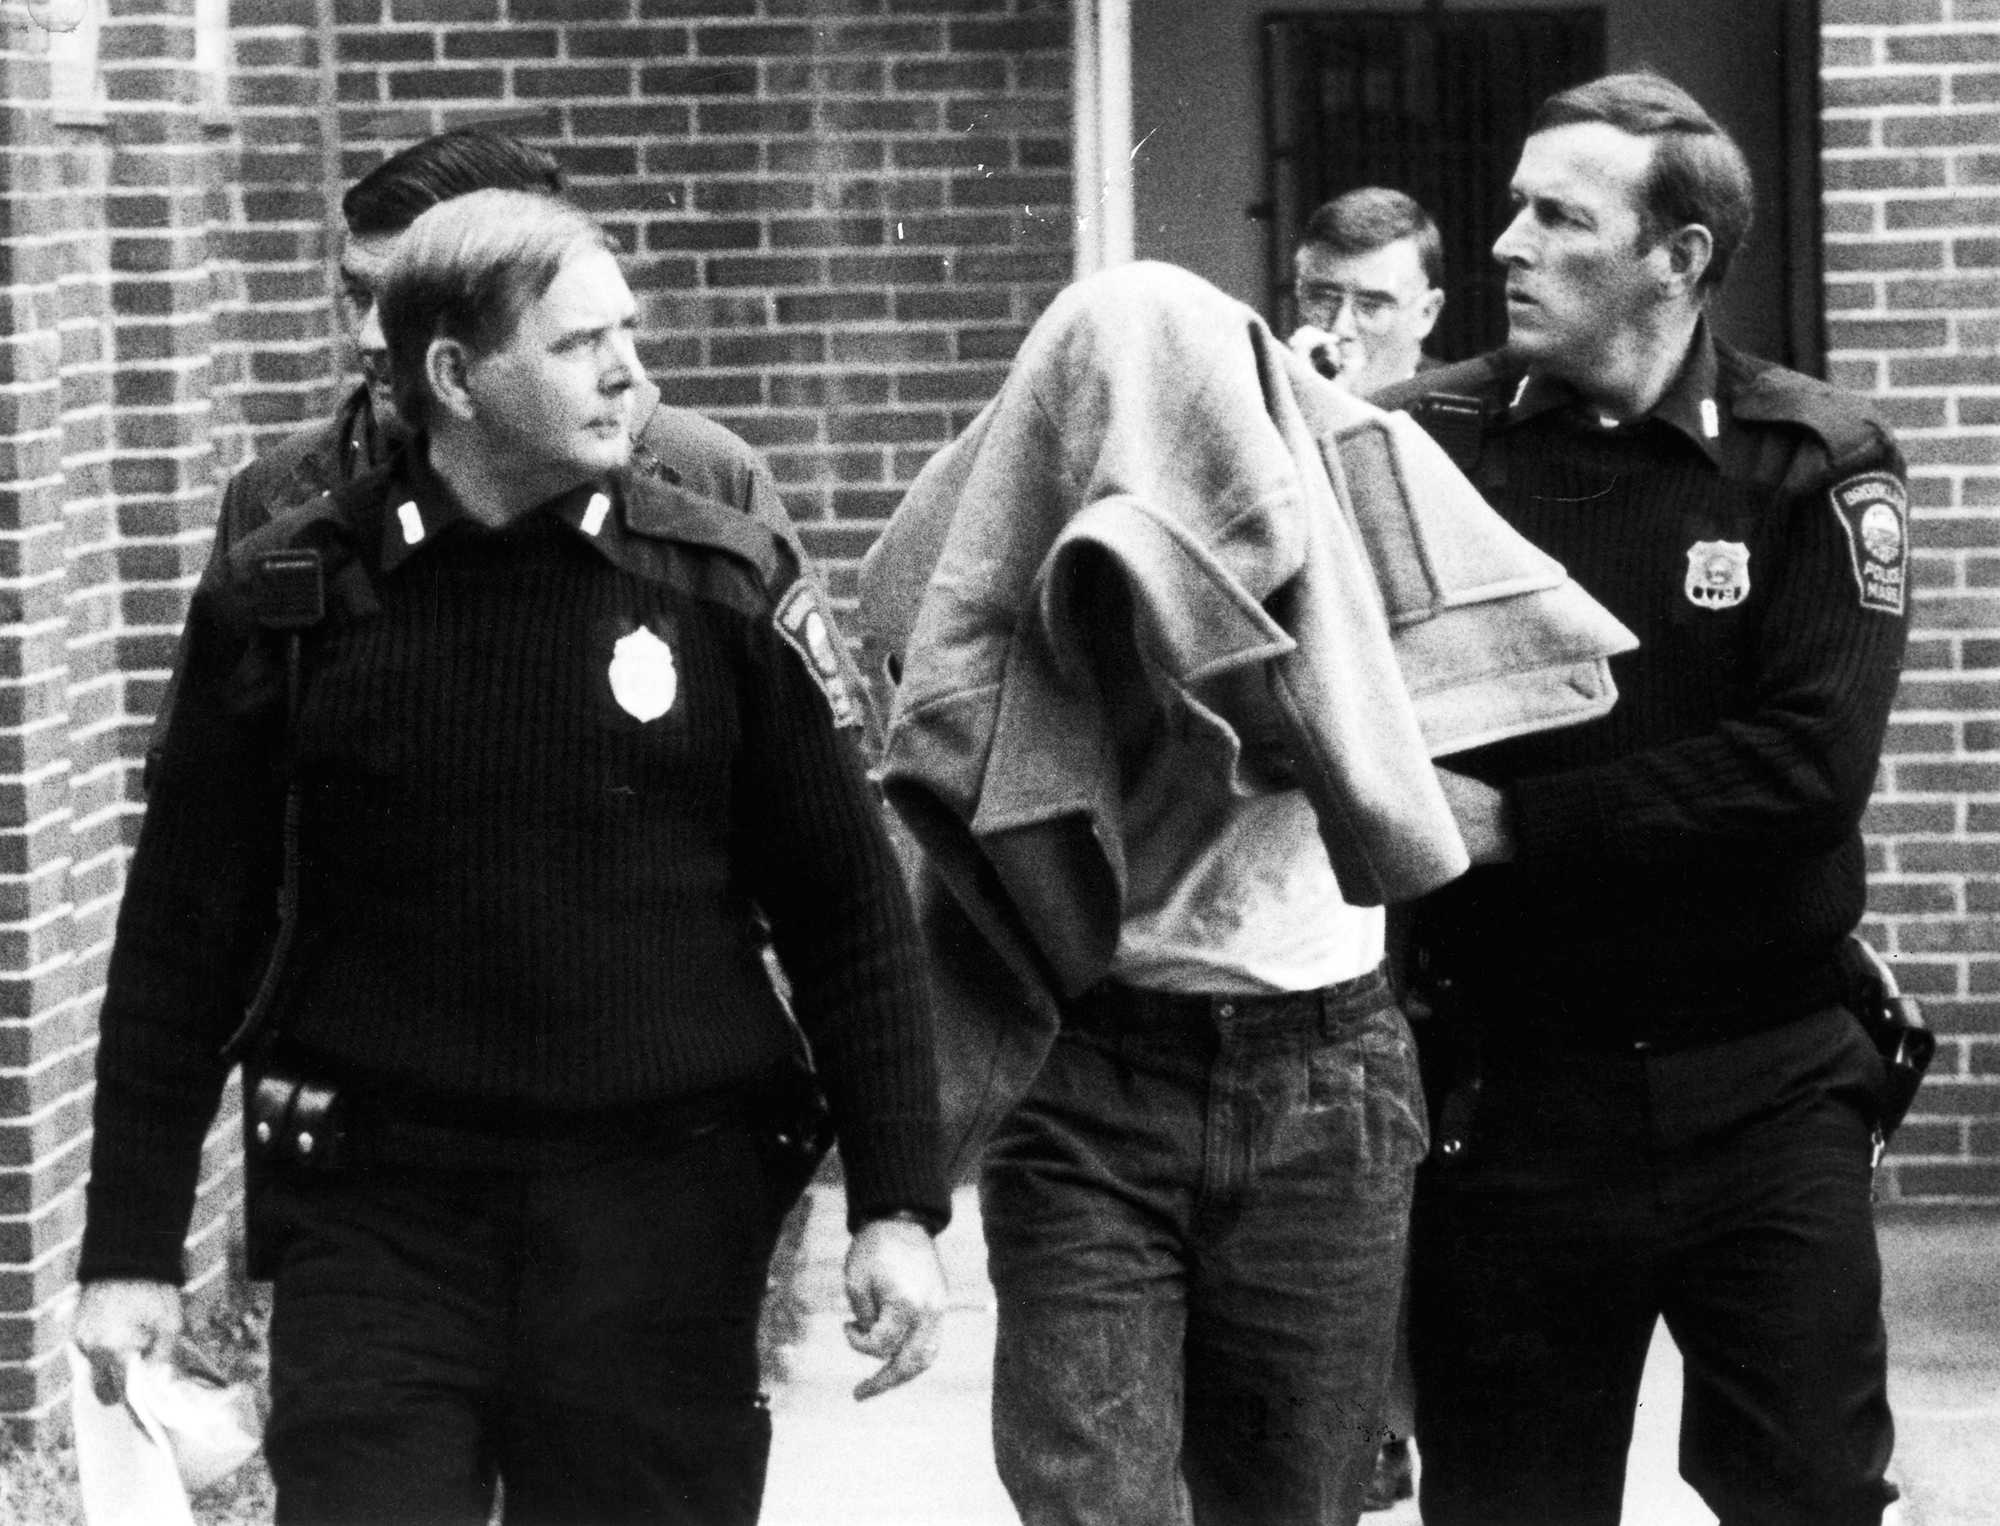 William "Willie" Bennett covered his face after his arraignment at Brookline District Court on Nov. 13, 1989. He was arraigned on charges he robbed a Brookline video store at gunpoint on Oct. 2. At the time, he was also the main suspect in the shootings of Carol Stuart and Charles Stuart.